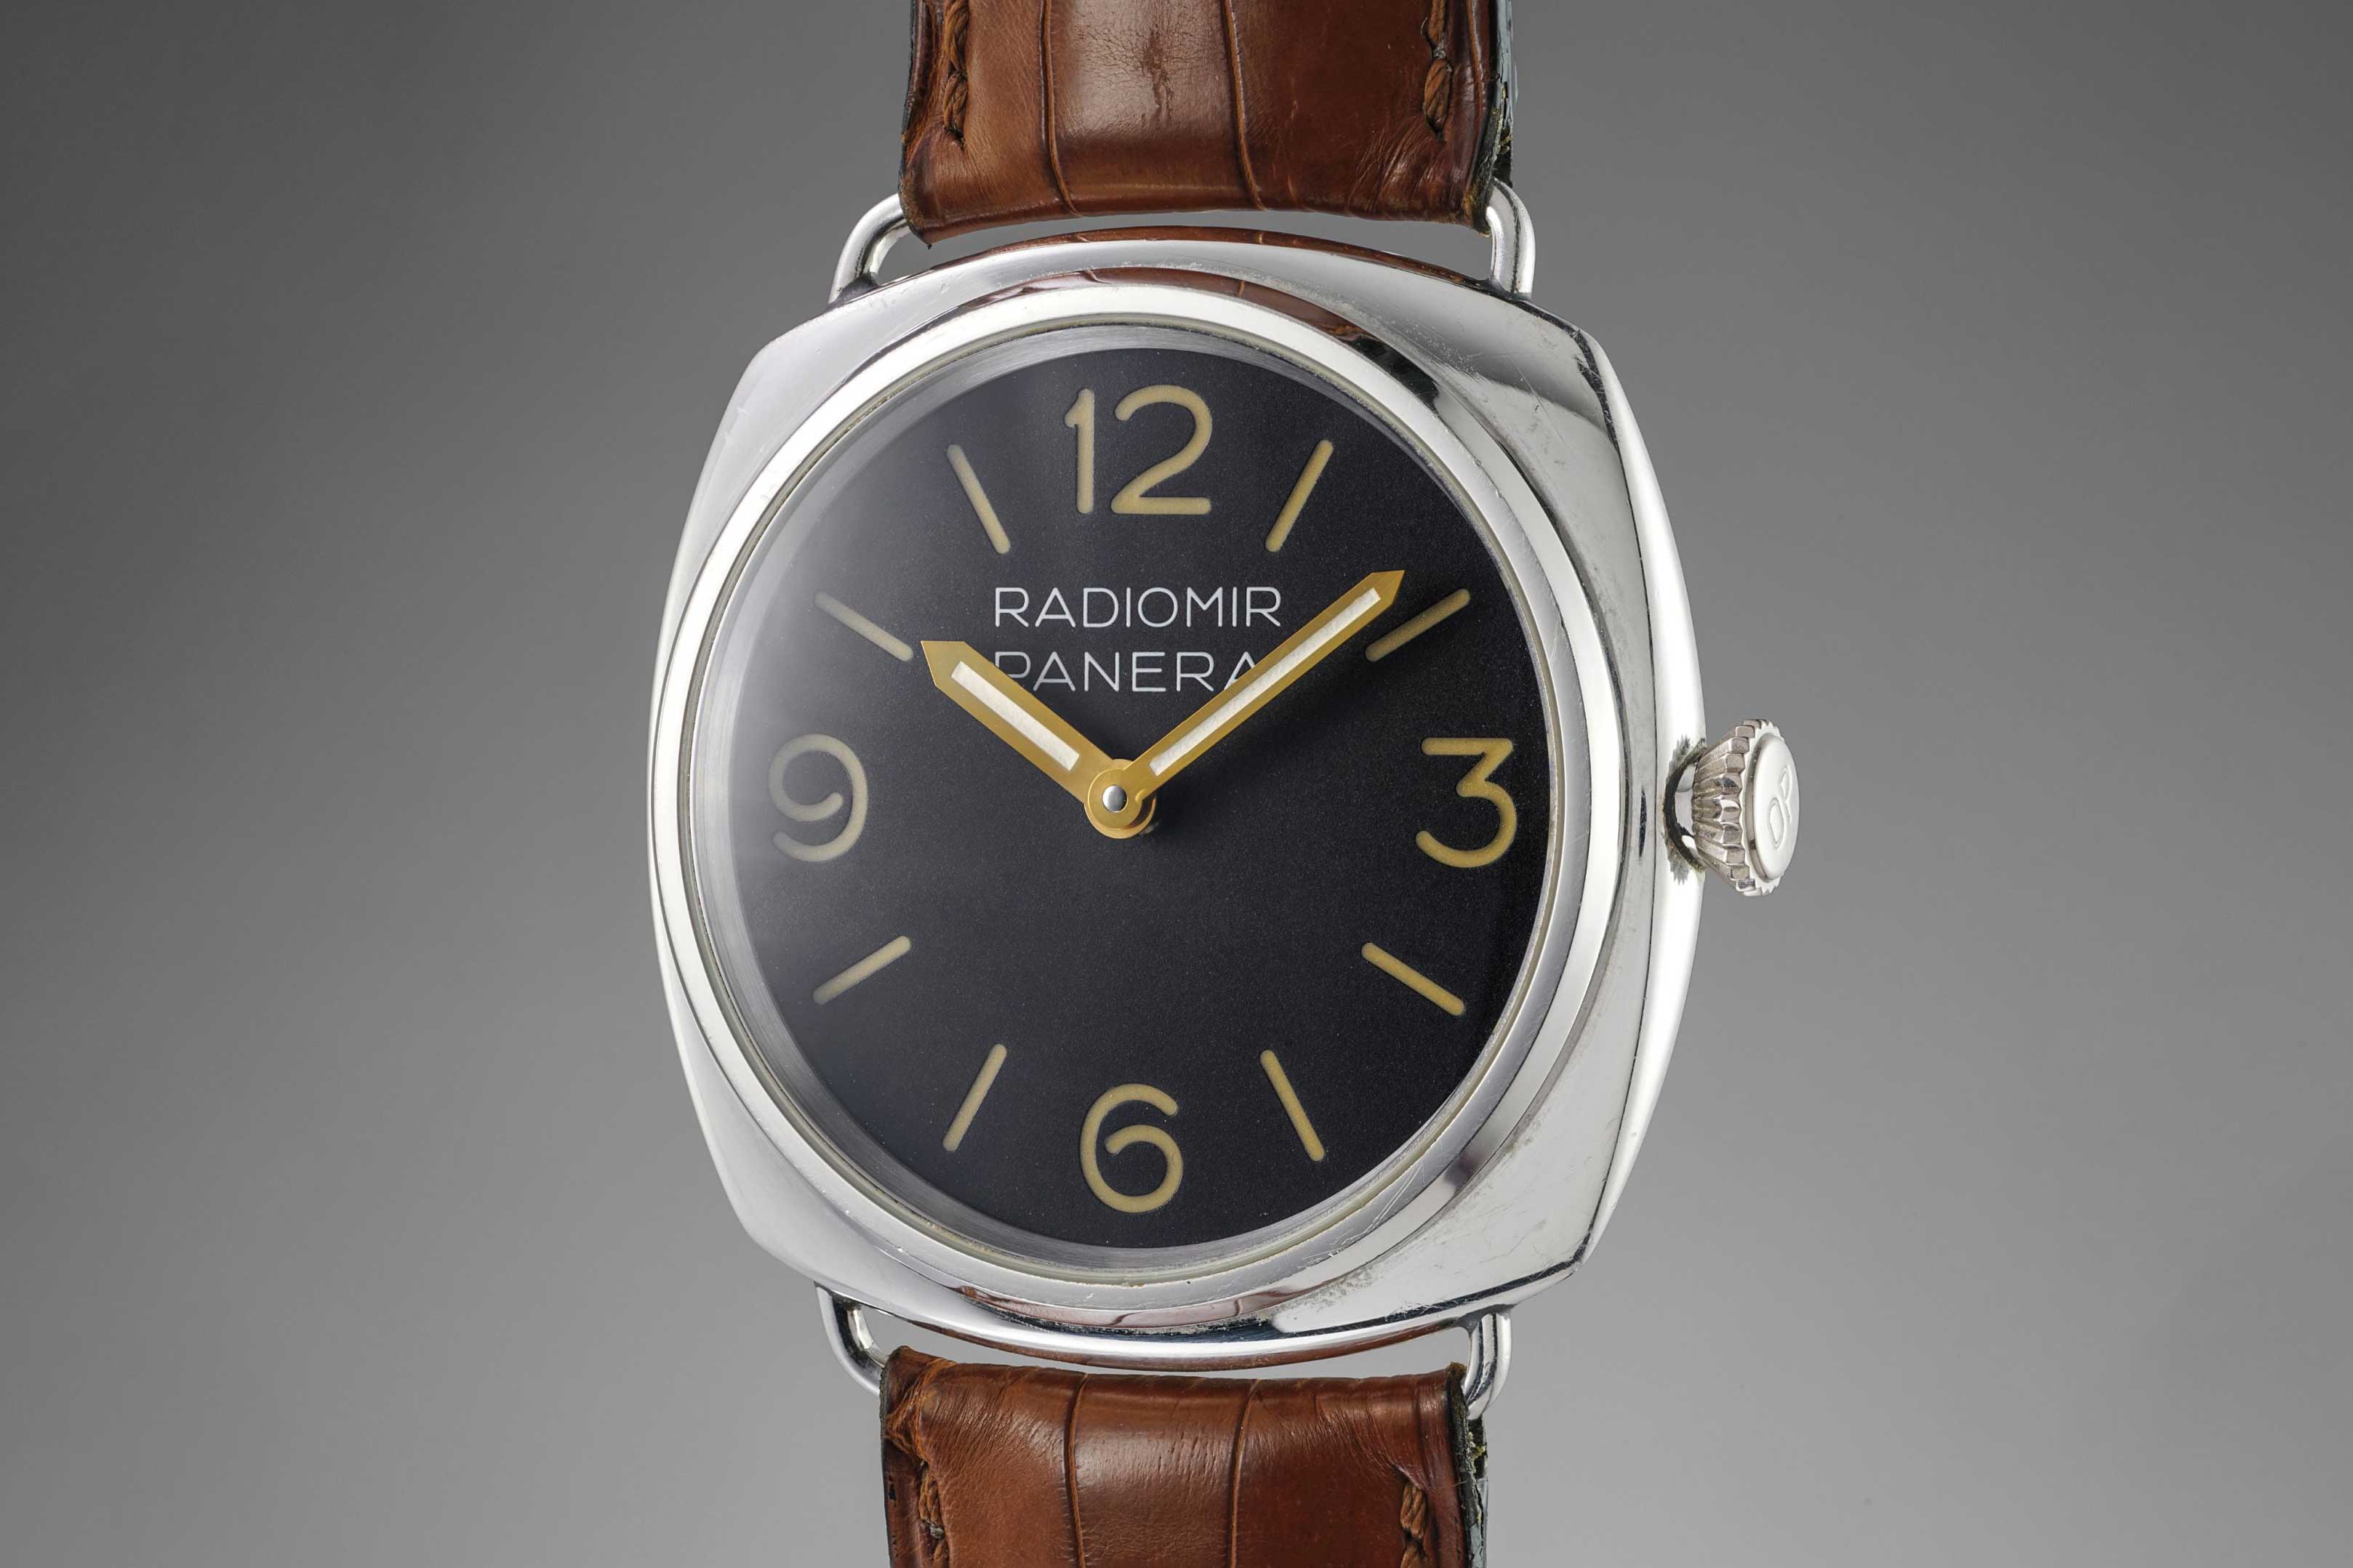 No. 2 of 60 of the 1997 platinum limited edition Panerai PAM 21, which sold with Phillips at their November 2017 Geneva sale for CHF125,000 (Image: phillips.com)